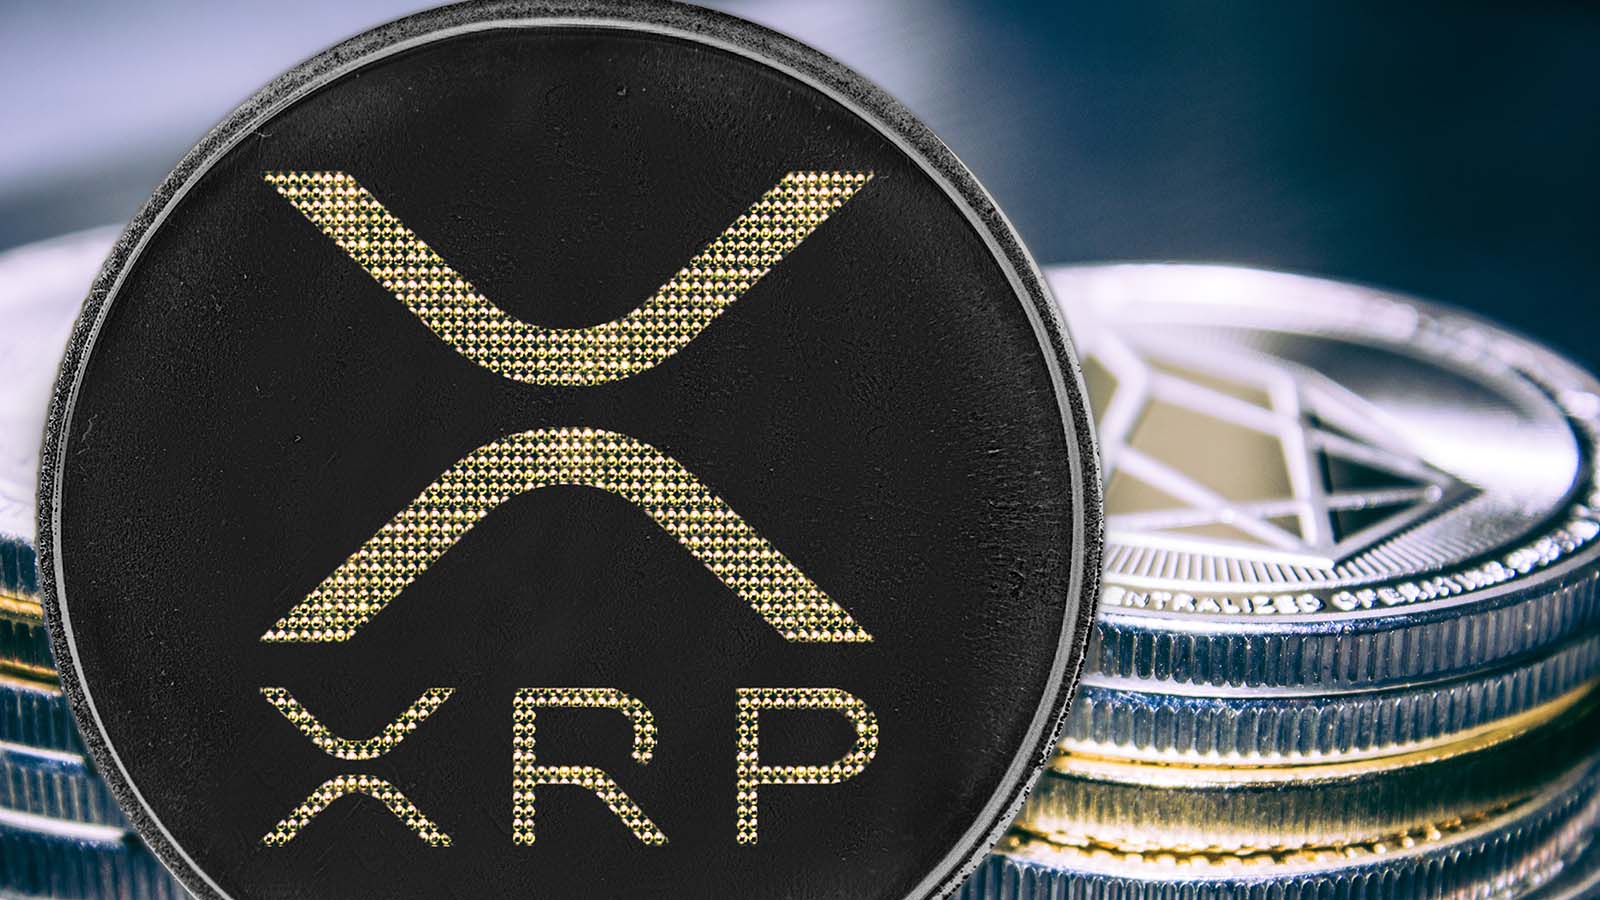 XRP News: Why the XRP Crypto Is Heating Up This Week